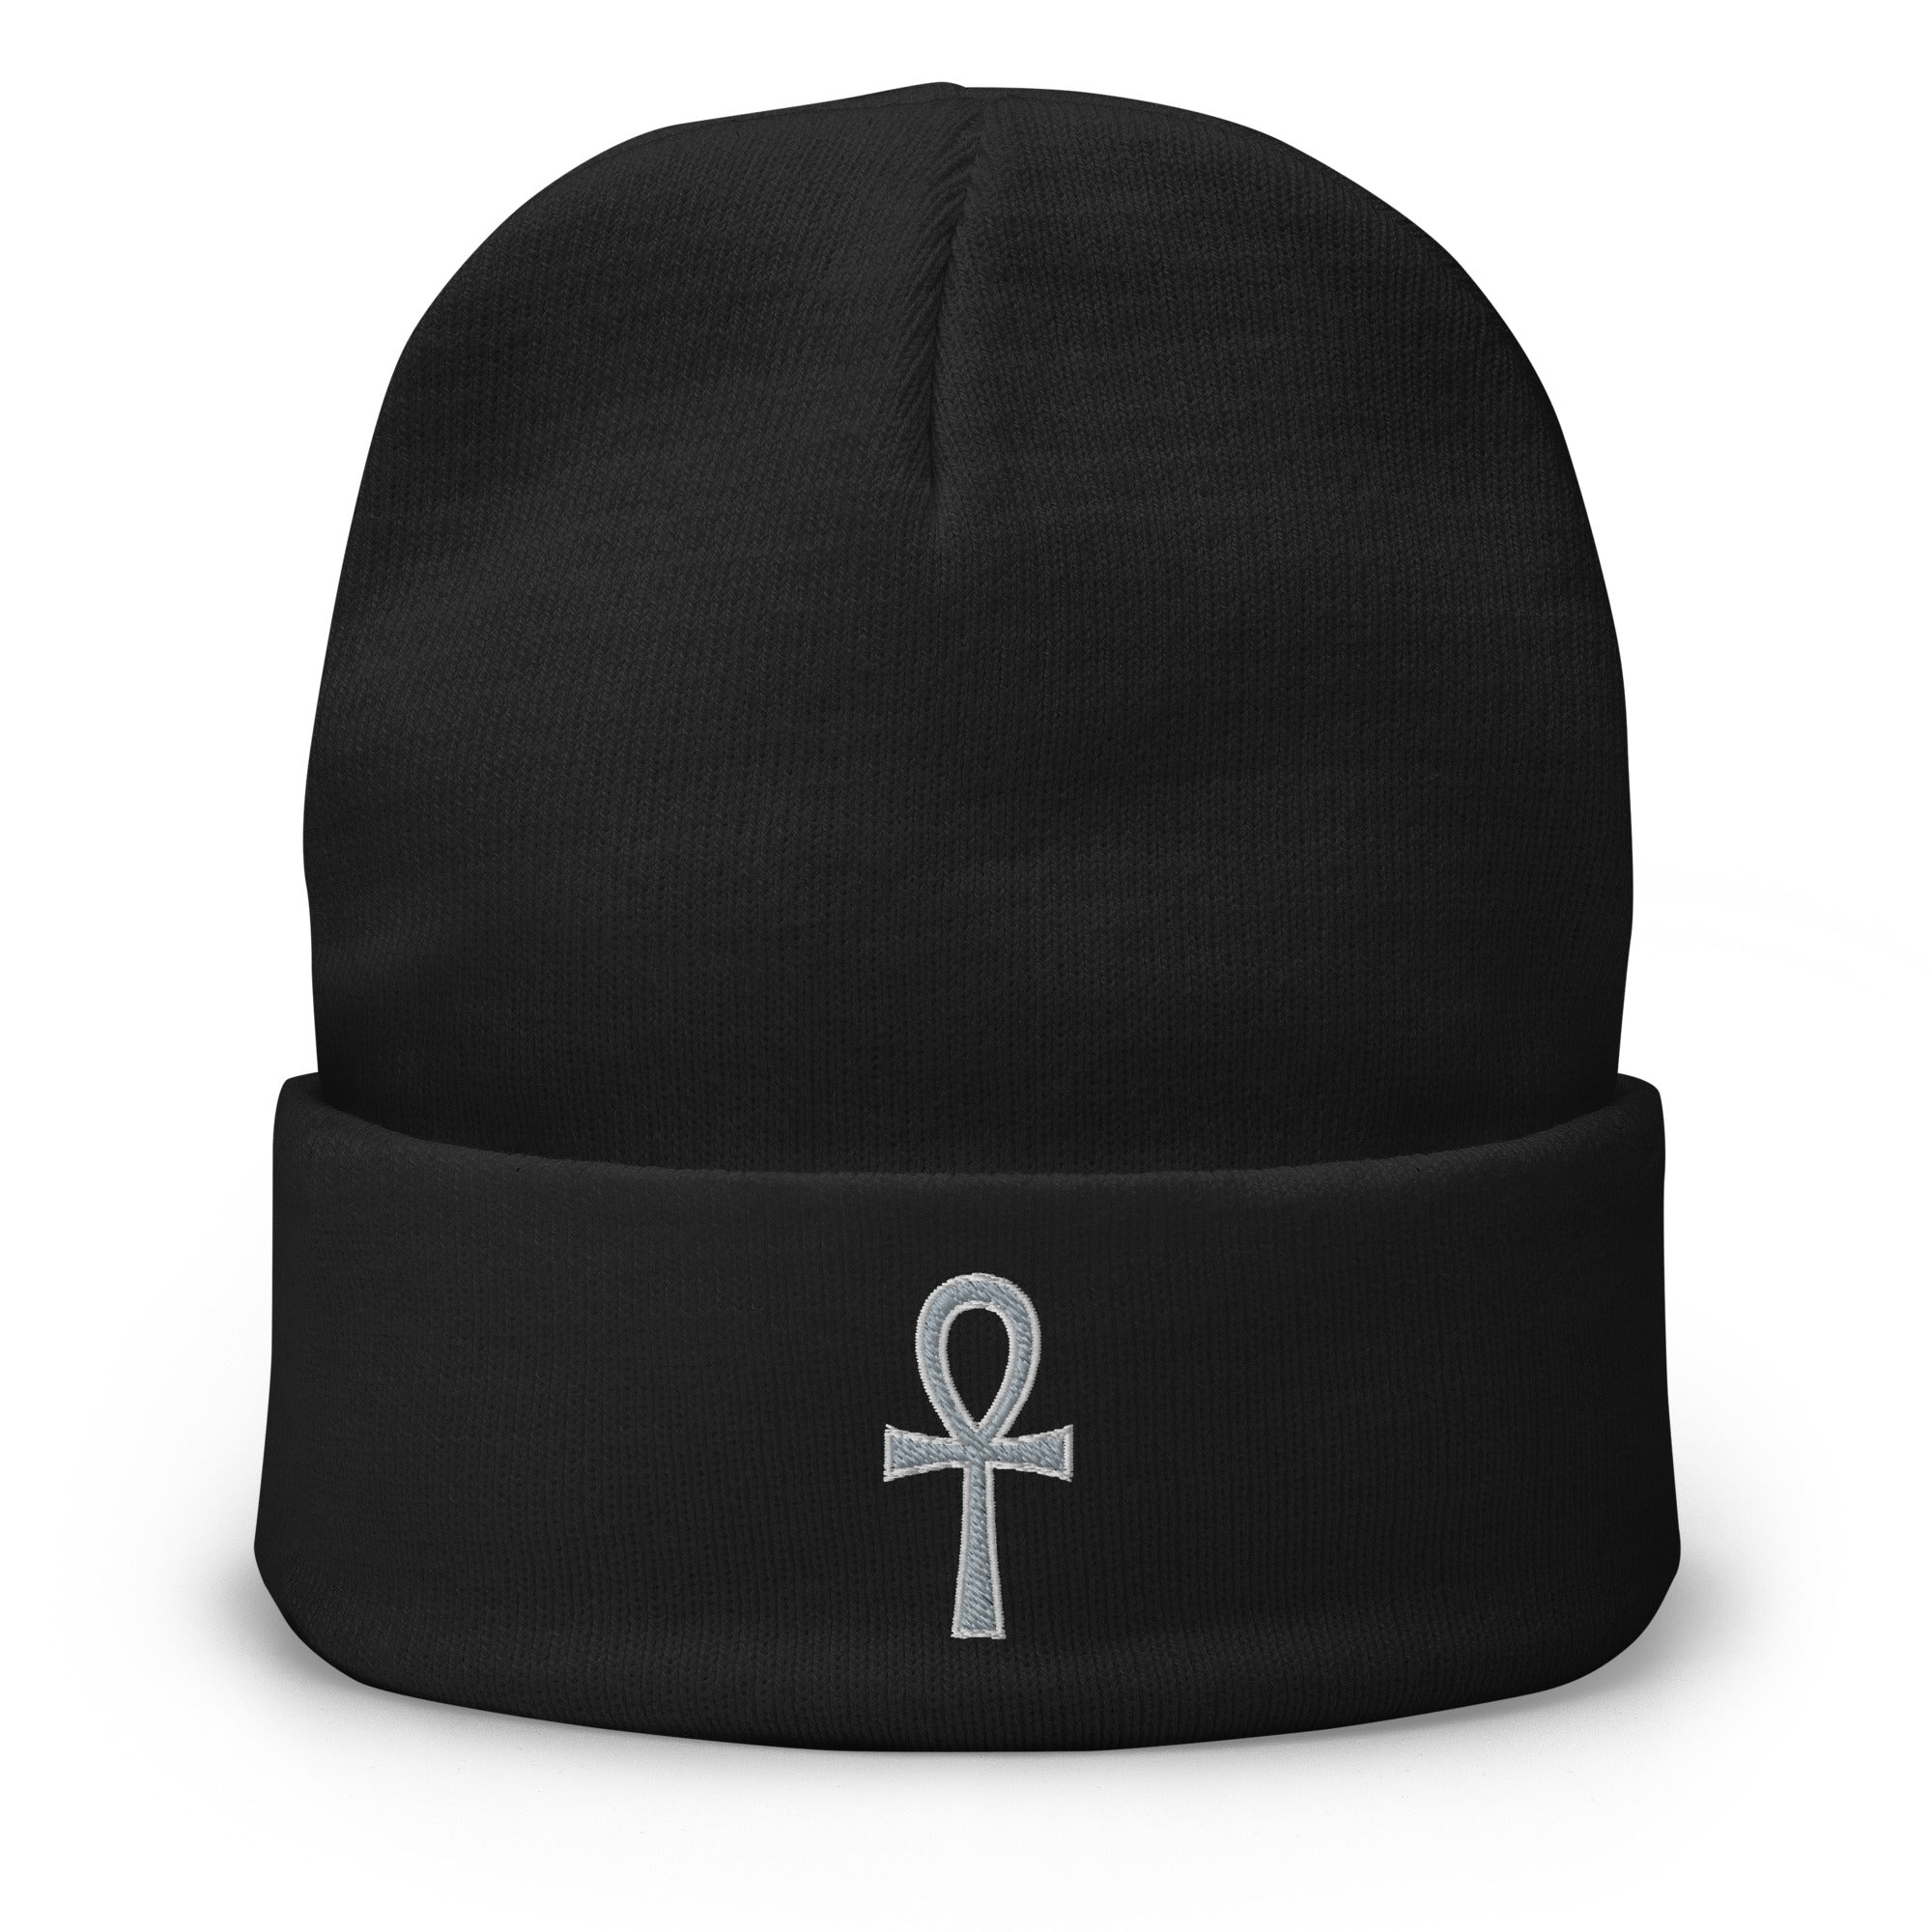 The Key of Life Ankh Ancient Egyptian Culture Embroidered Cuff Beanie Grey Thread - Edge of Life Designs